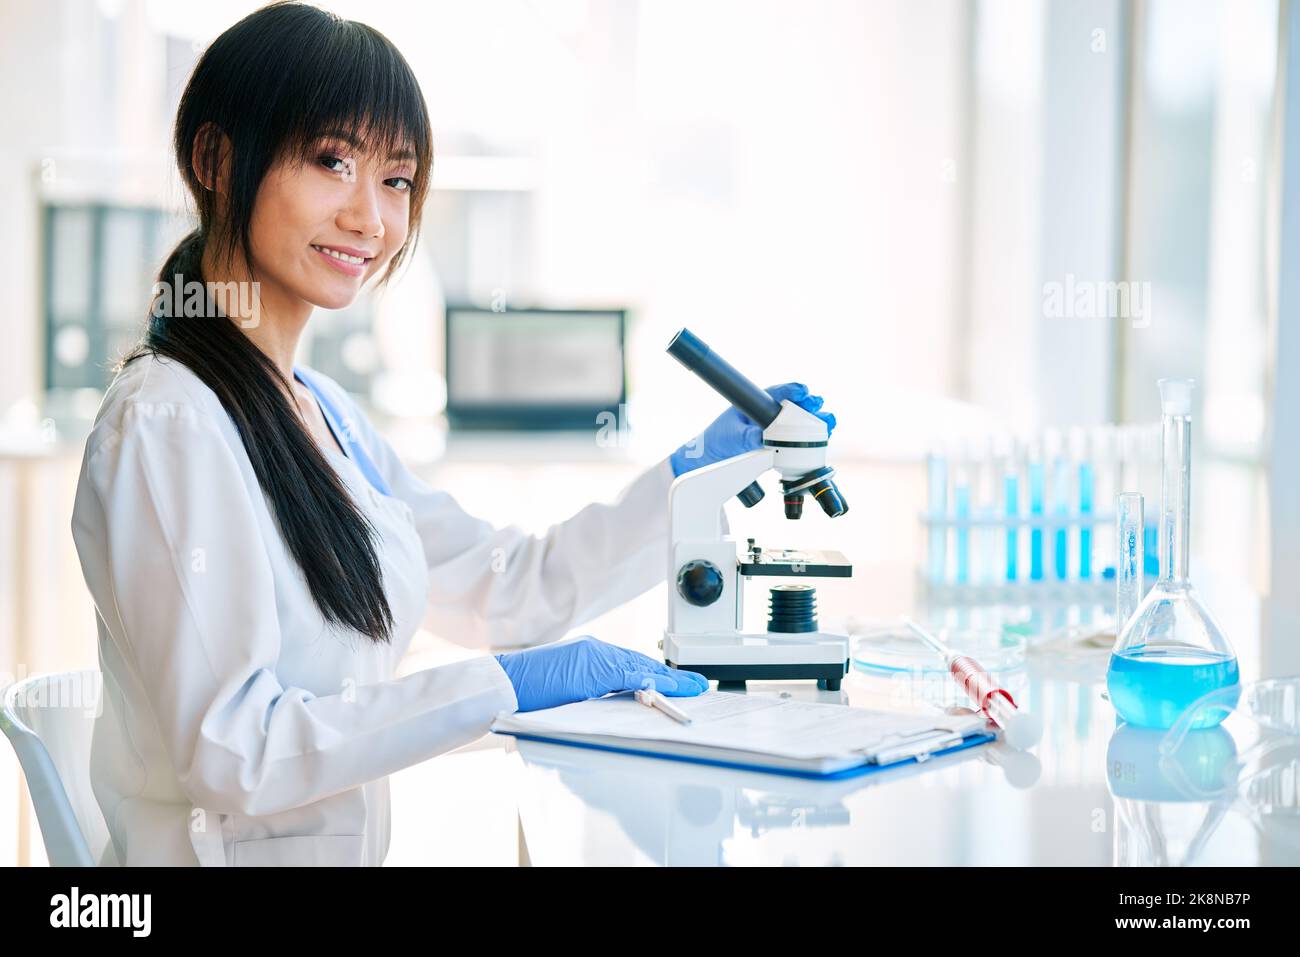 Smiling asian female scientist posing in modern medical research laboratory next to microscope. Stock Photo